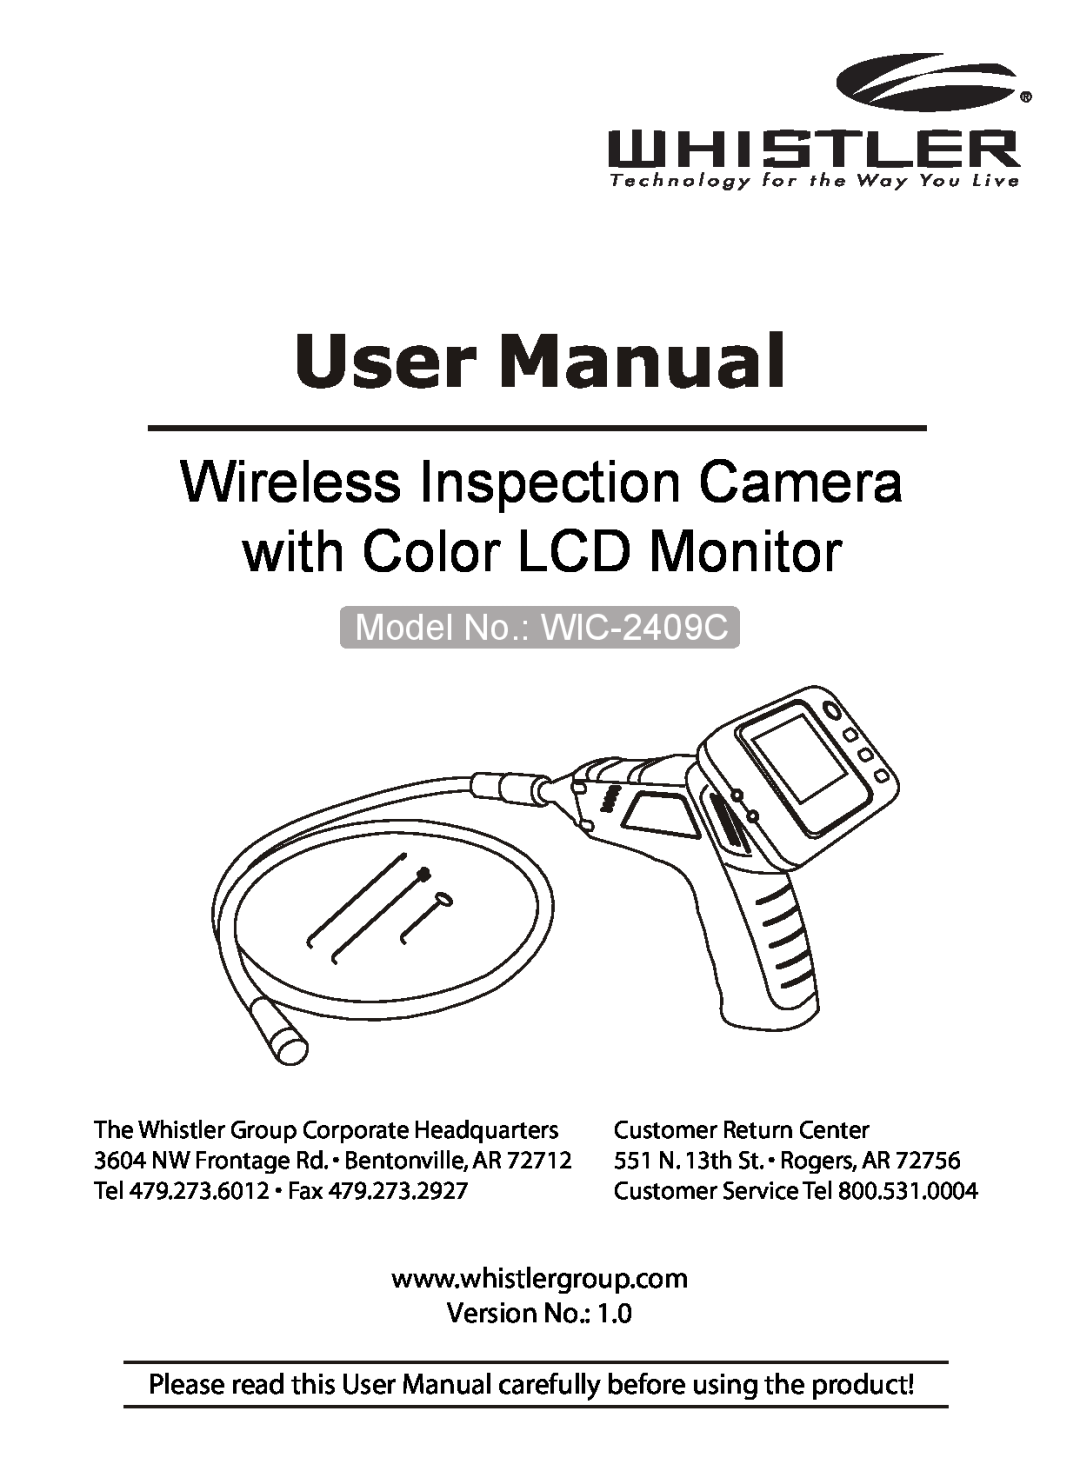 Whistler user manual Wireless Inspection Camera with Color LCD Monitor, Model No. WIC-2409C 